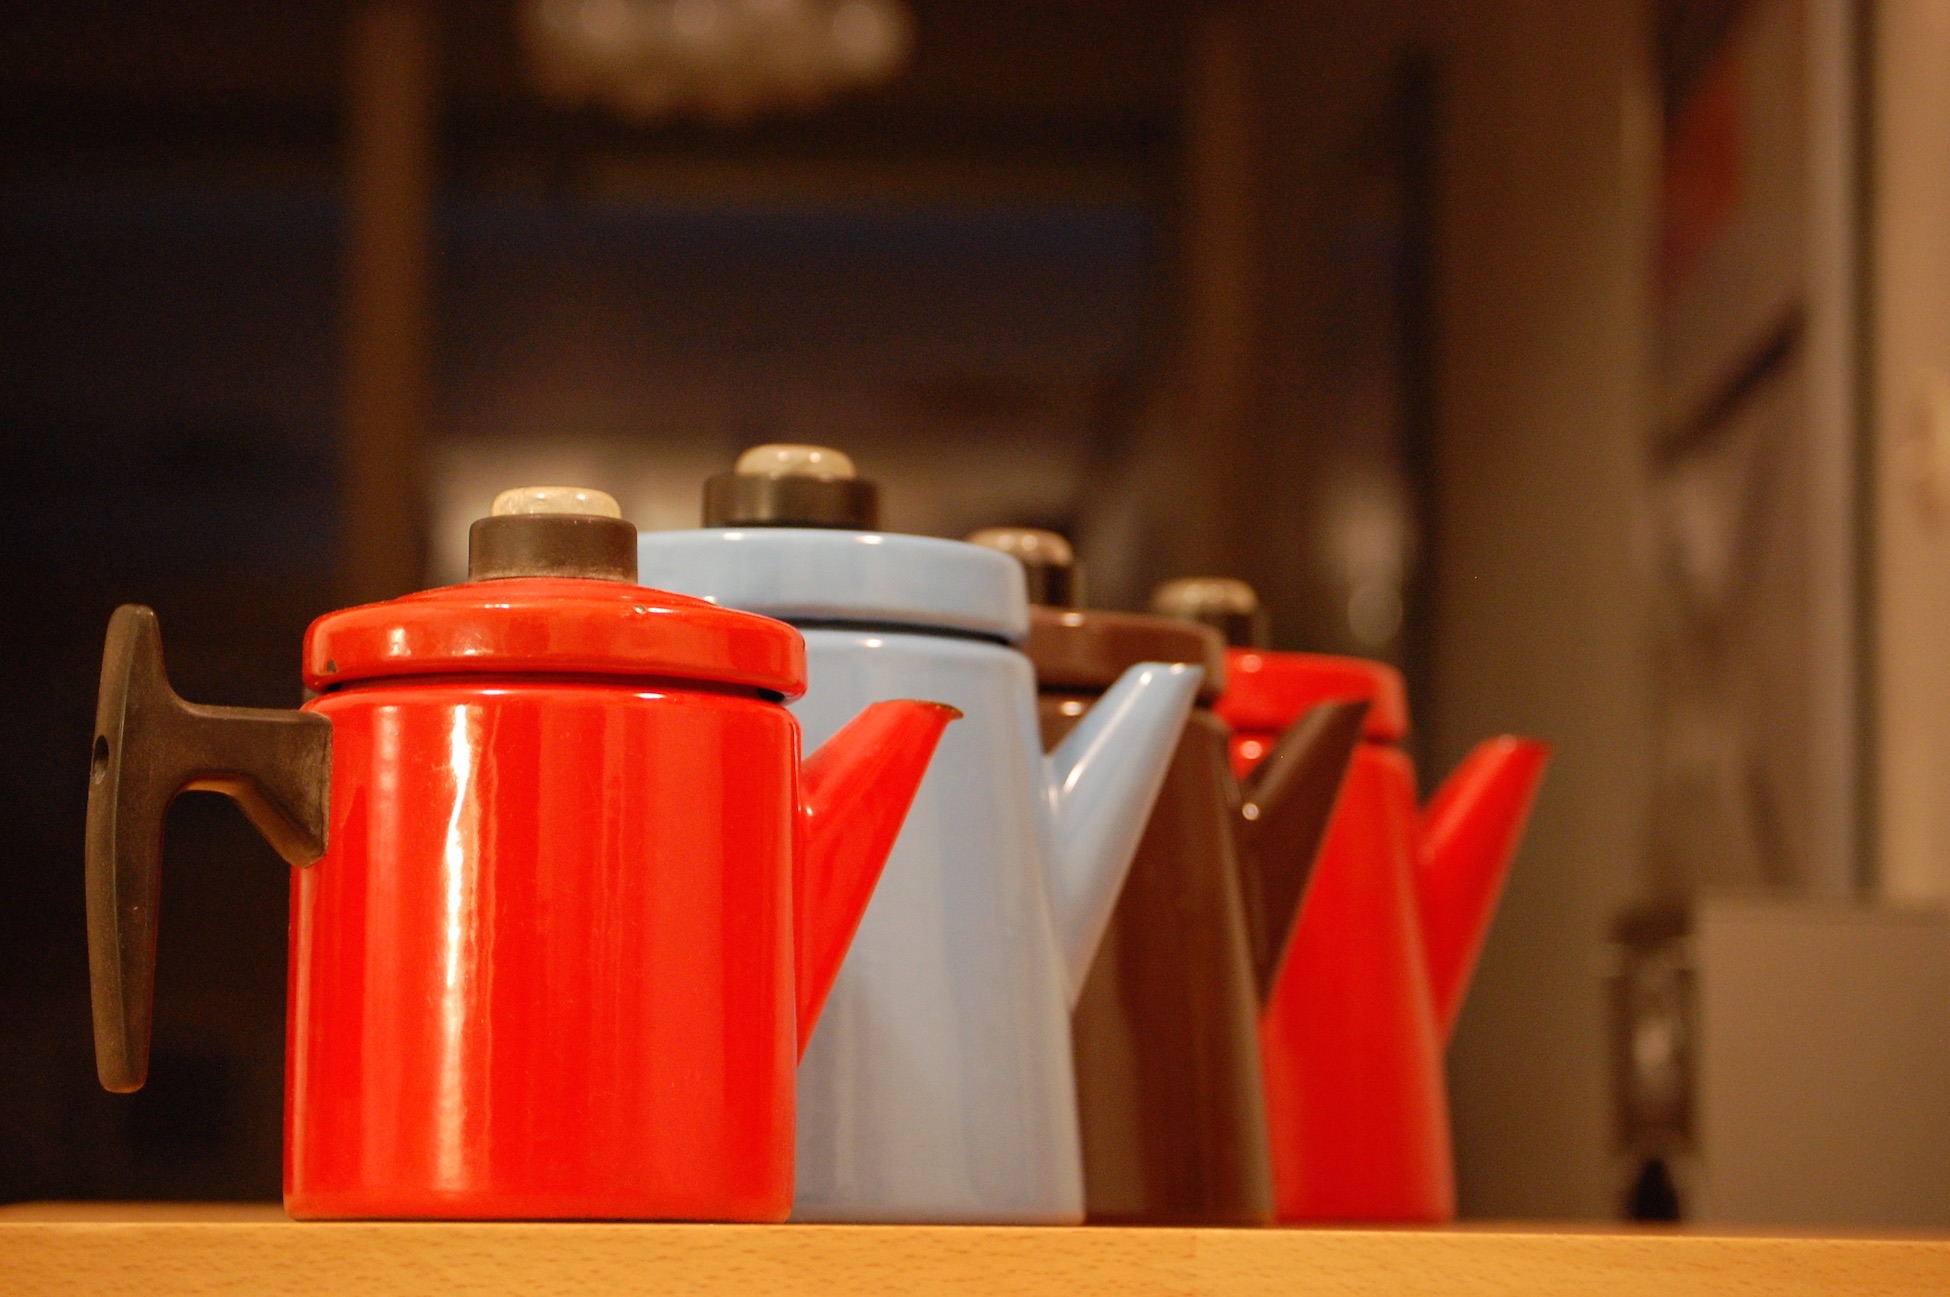 Some different sized and coloured coffee pots by Antti Nurmesniemi, perhaps his most known design.